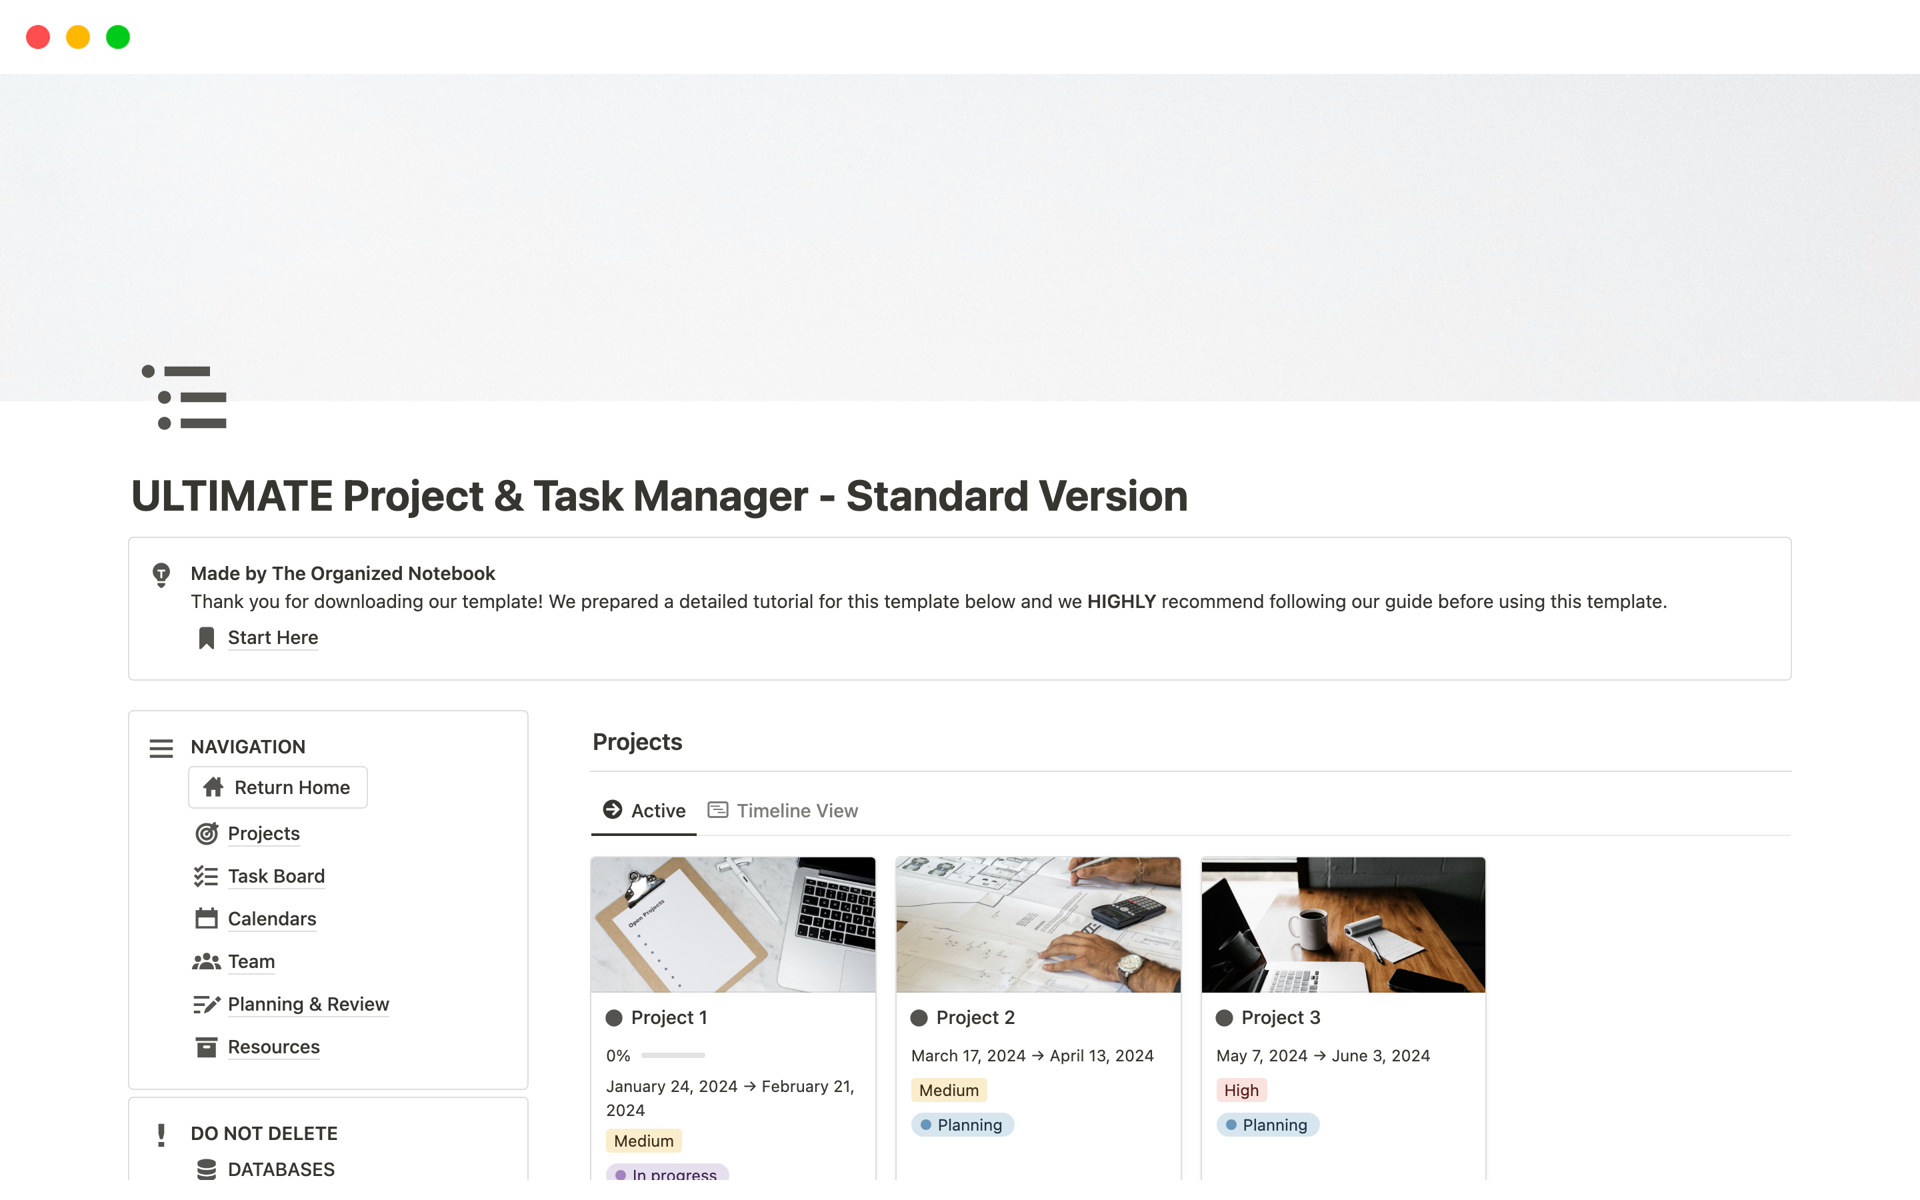 A template preview for ULTIMATE Project & Task Manager - Standard Version